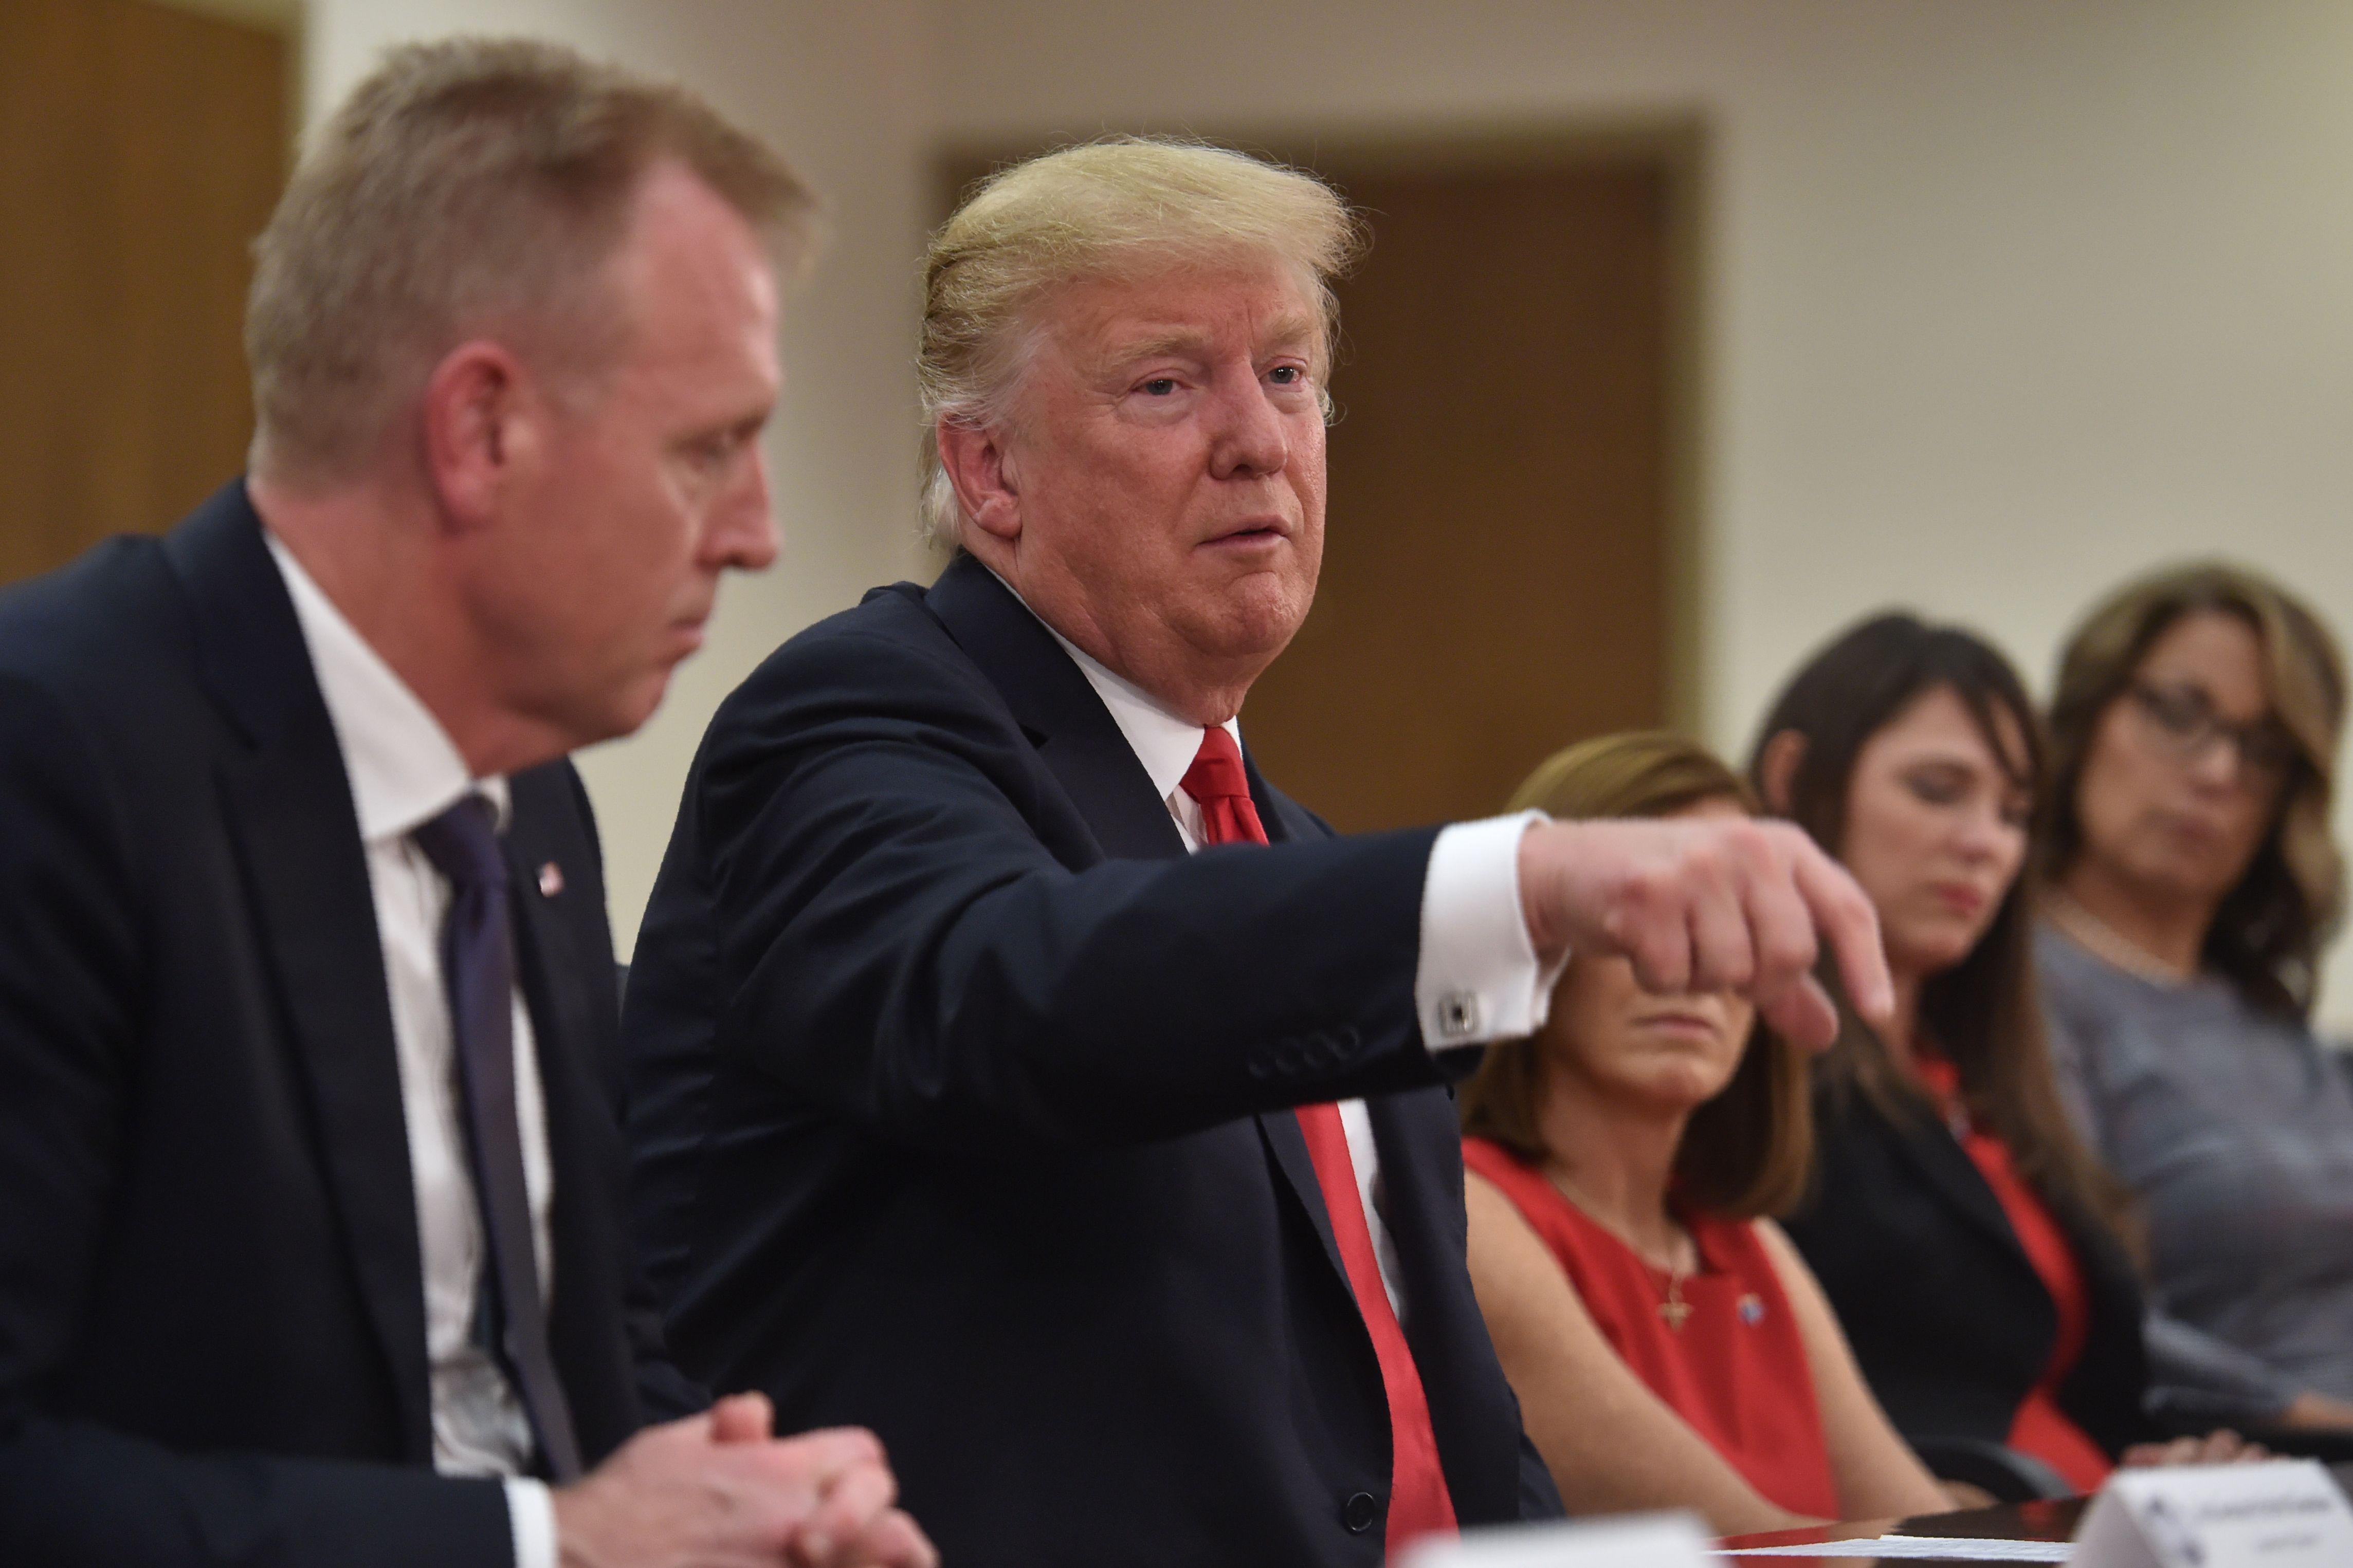 President Donald Trump speaks during a defense roundtable at Luke Air Force Base in Phoenix , Arizona on October 19, 2018.